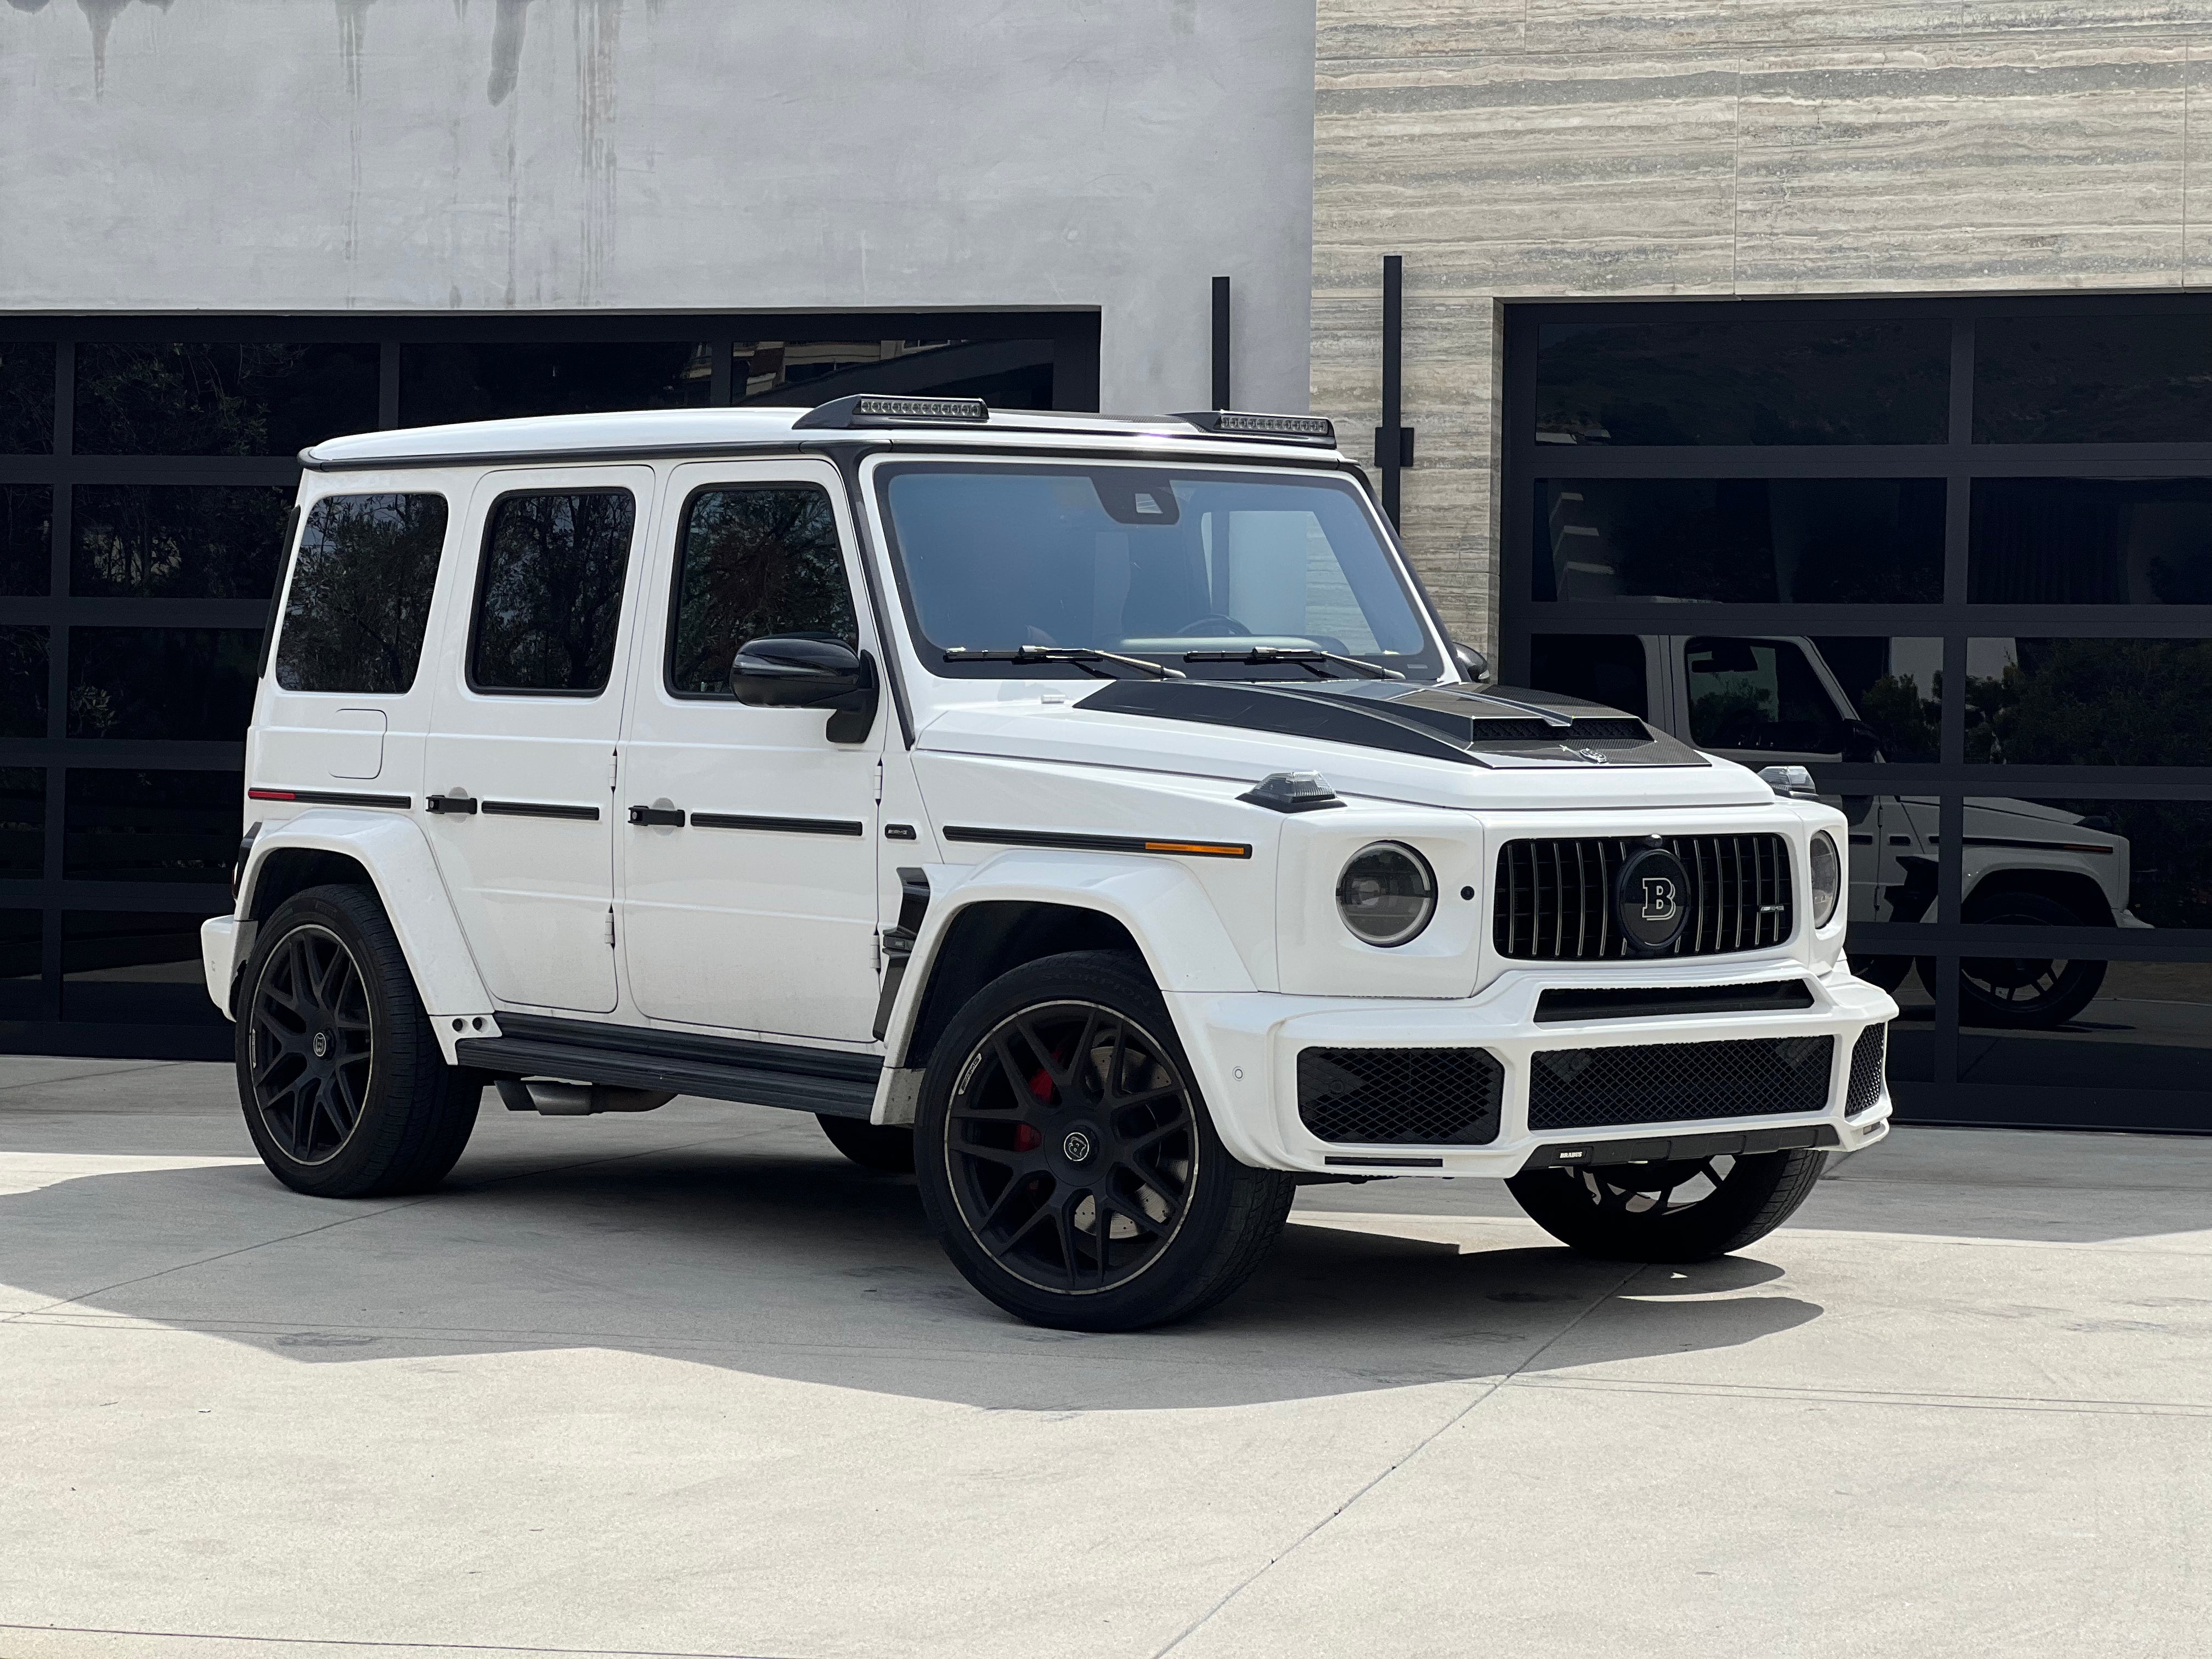 Mercedes-AMG G63 Edition 1 Could Be The Perfect Getaway Car